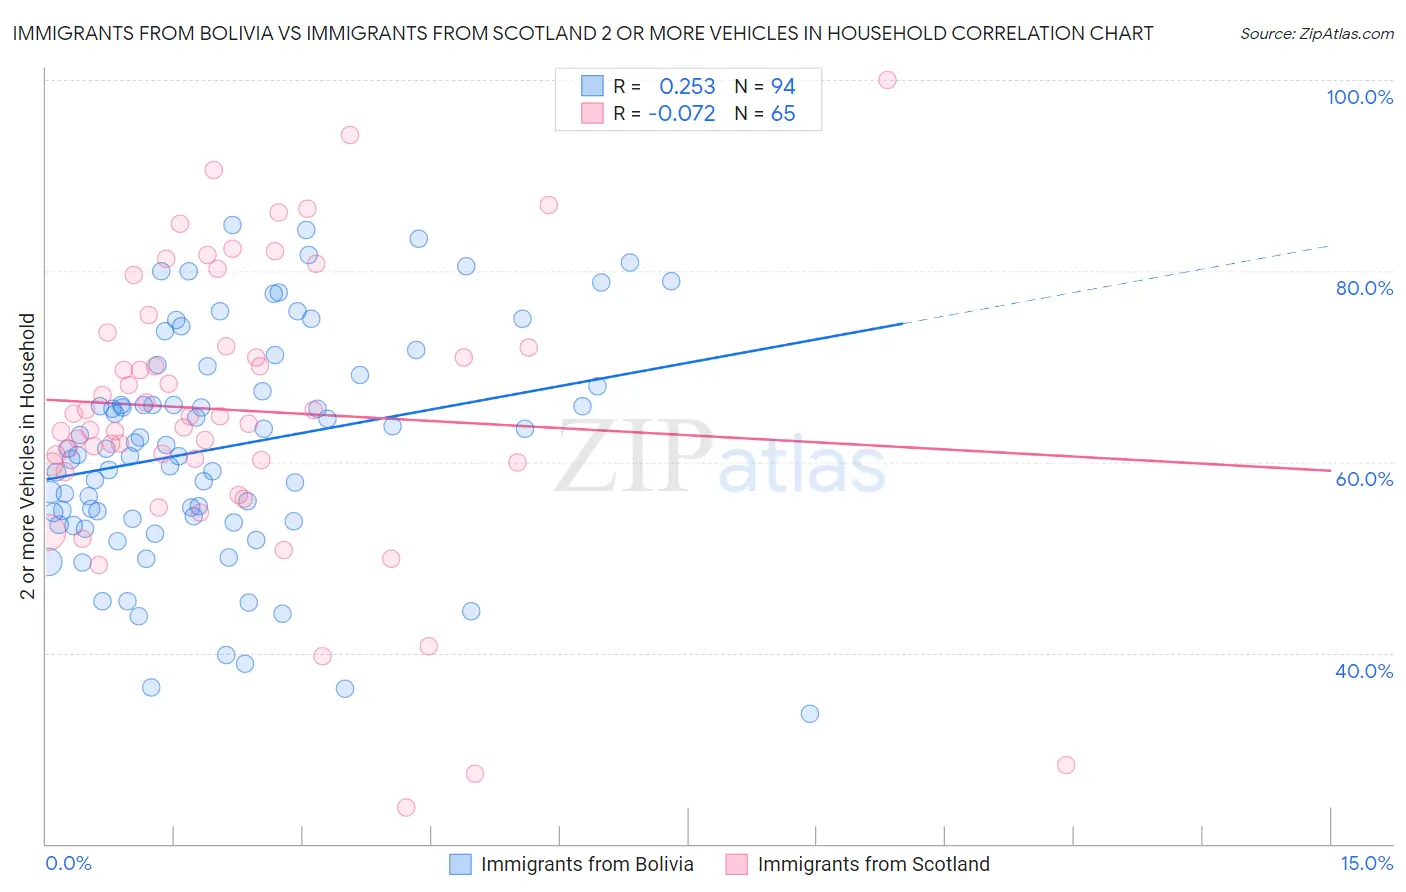 Immigrants from Bolivia vs Immigrants from Scotland 2 or more Vehicles in Household